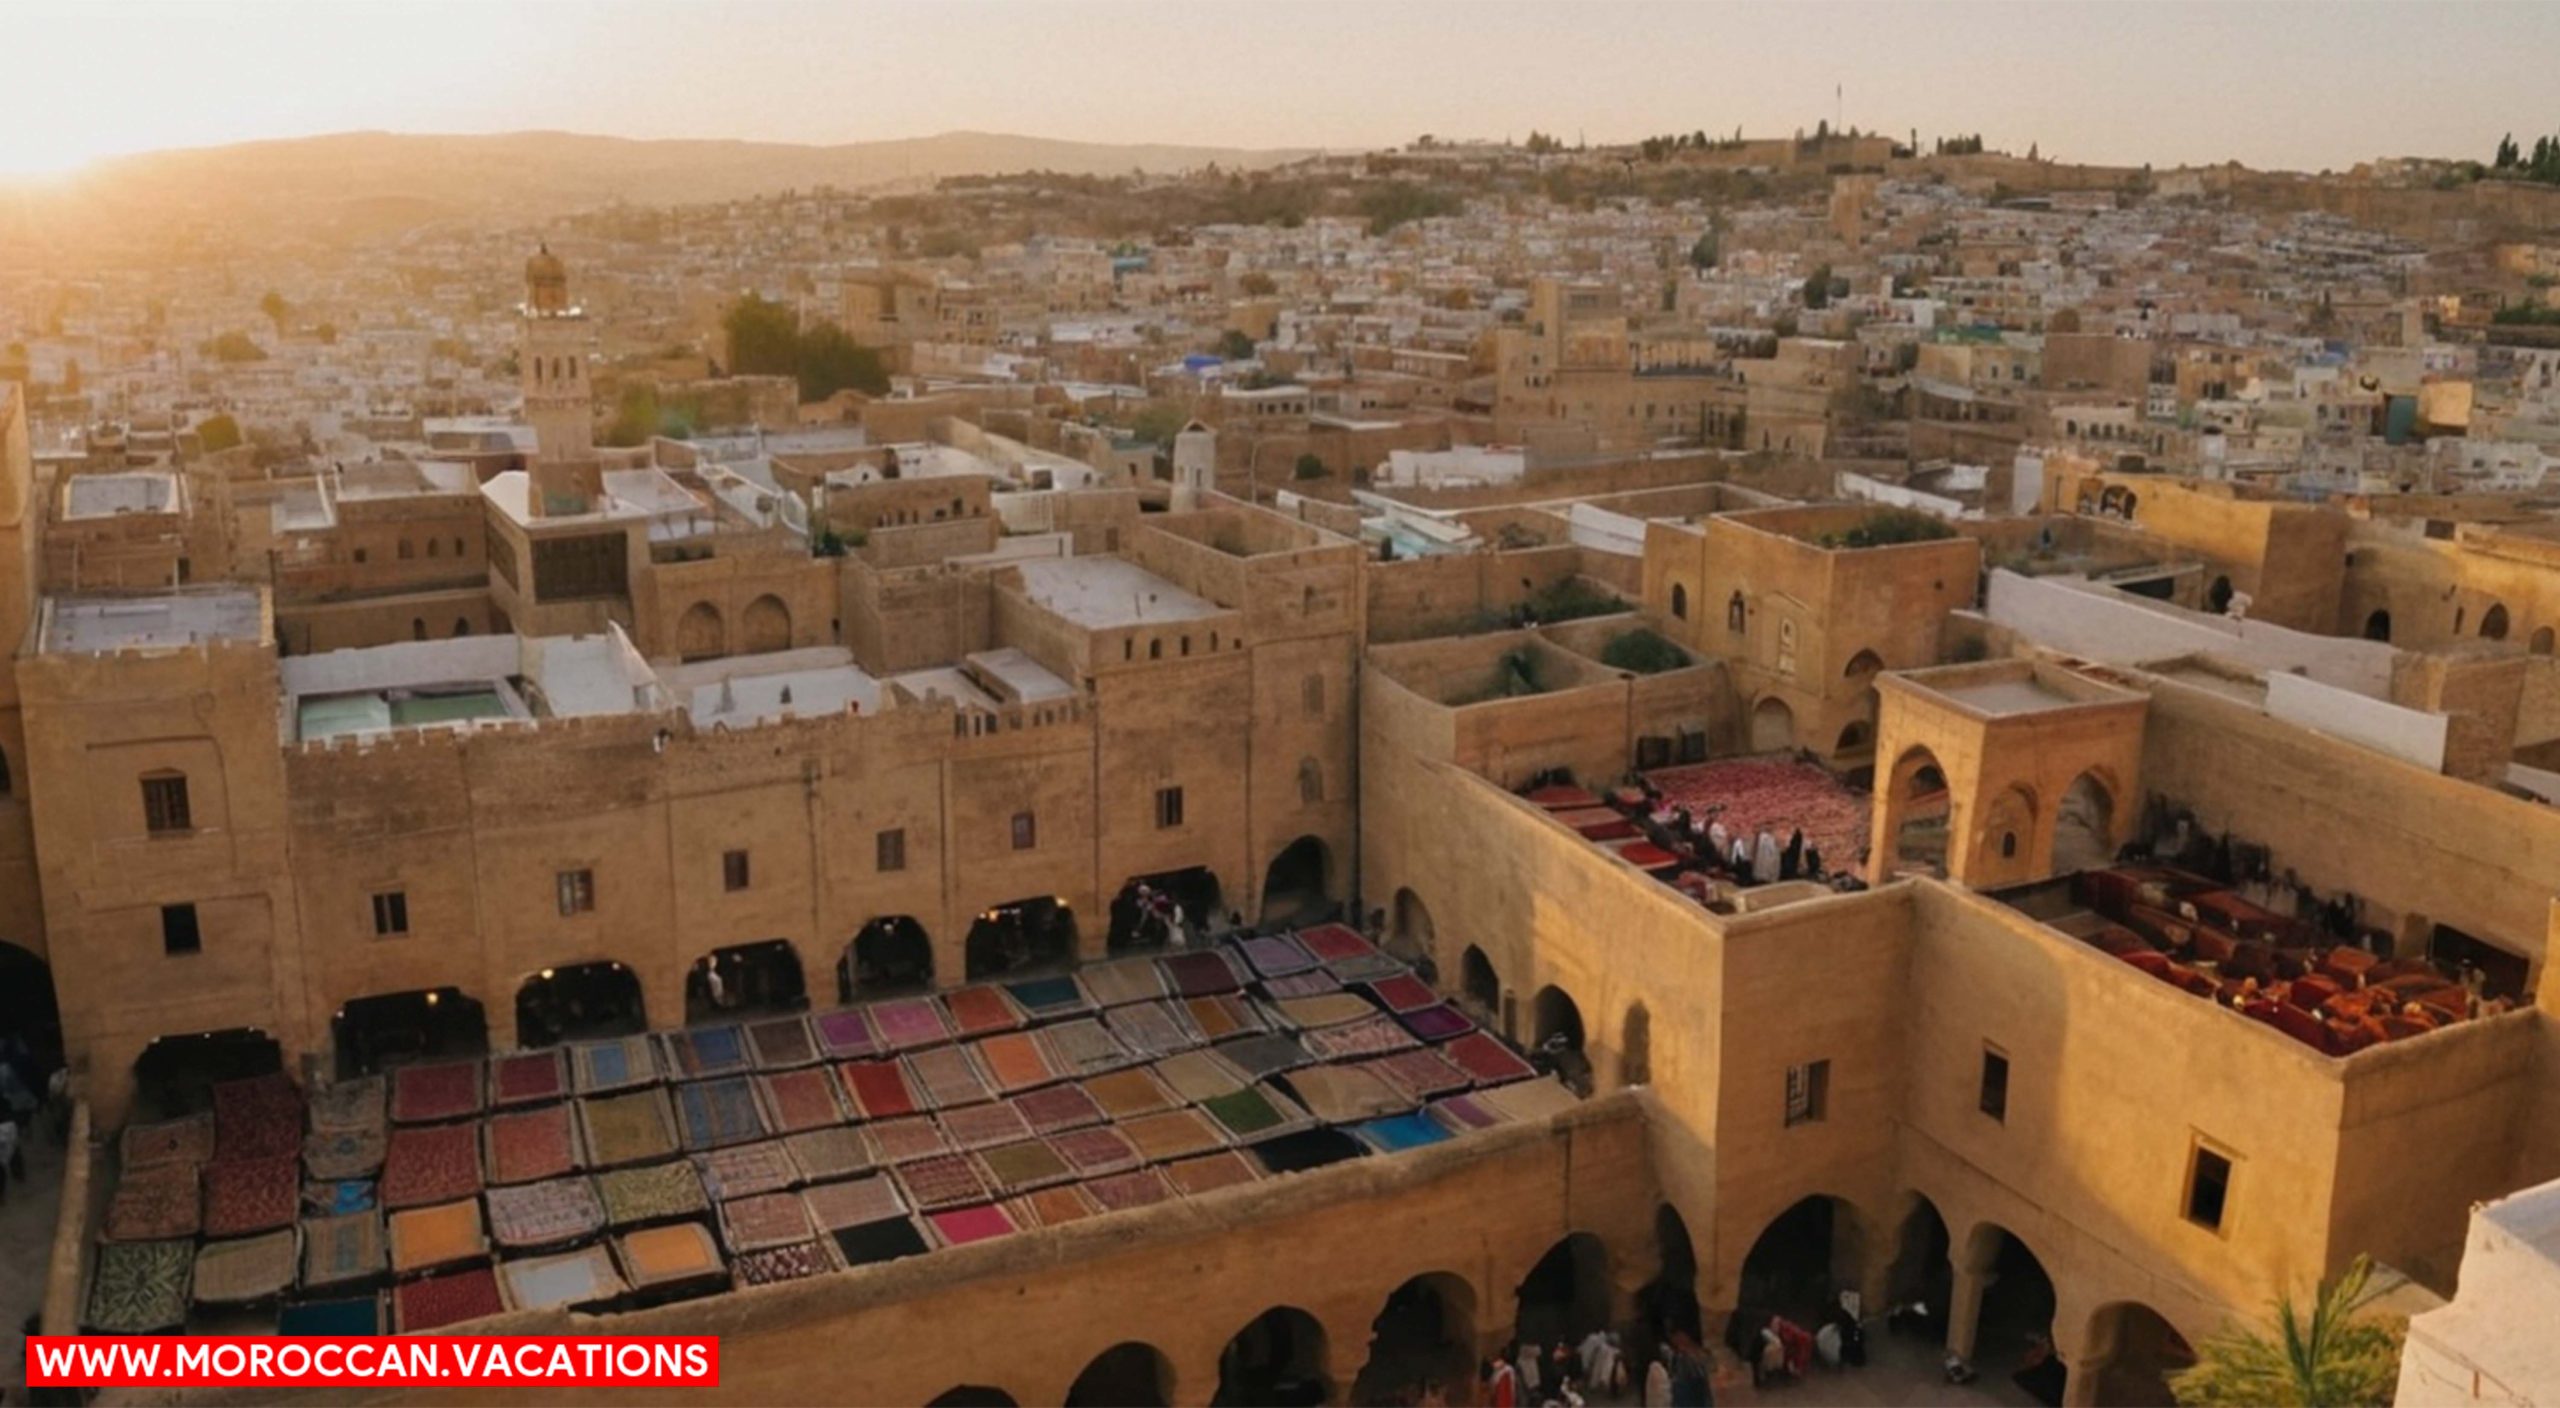 An aerial view of Fez Medina's labyrinthine alleys, vibrant with colorful Moroccan rugs, pottery, and locals in traditional attire.